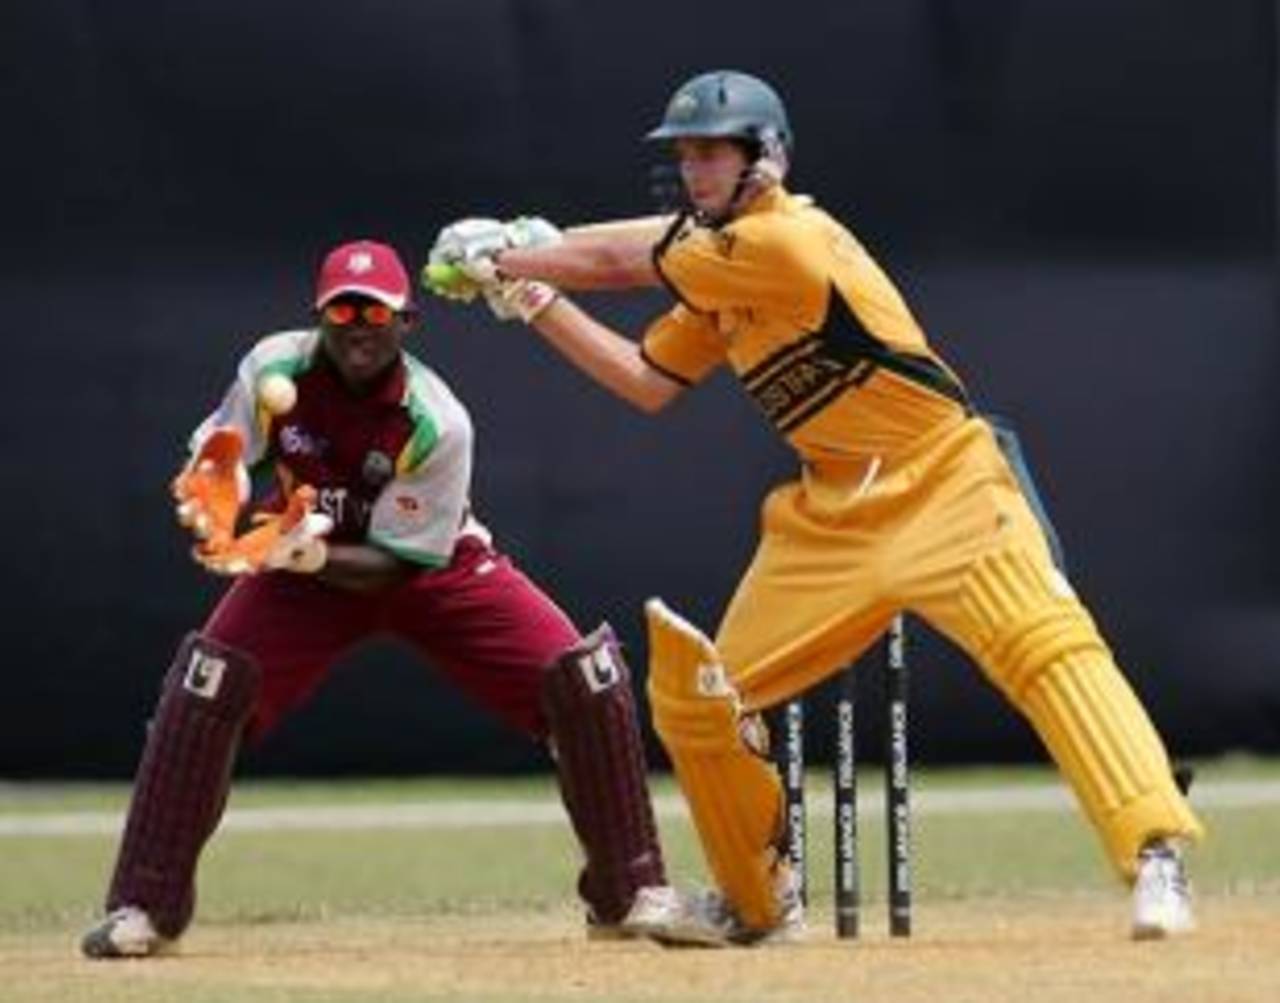 Michael Cranmer reaches out to cut, Australia Under-19s v West Indies Under-19s, Under-19 World Cup warm-ups, 4th day, Kelab Aman, Kuala Lumpur, February 14, 2008